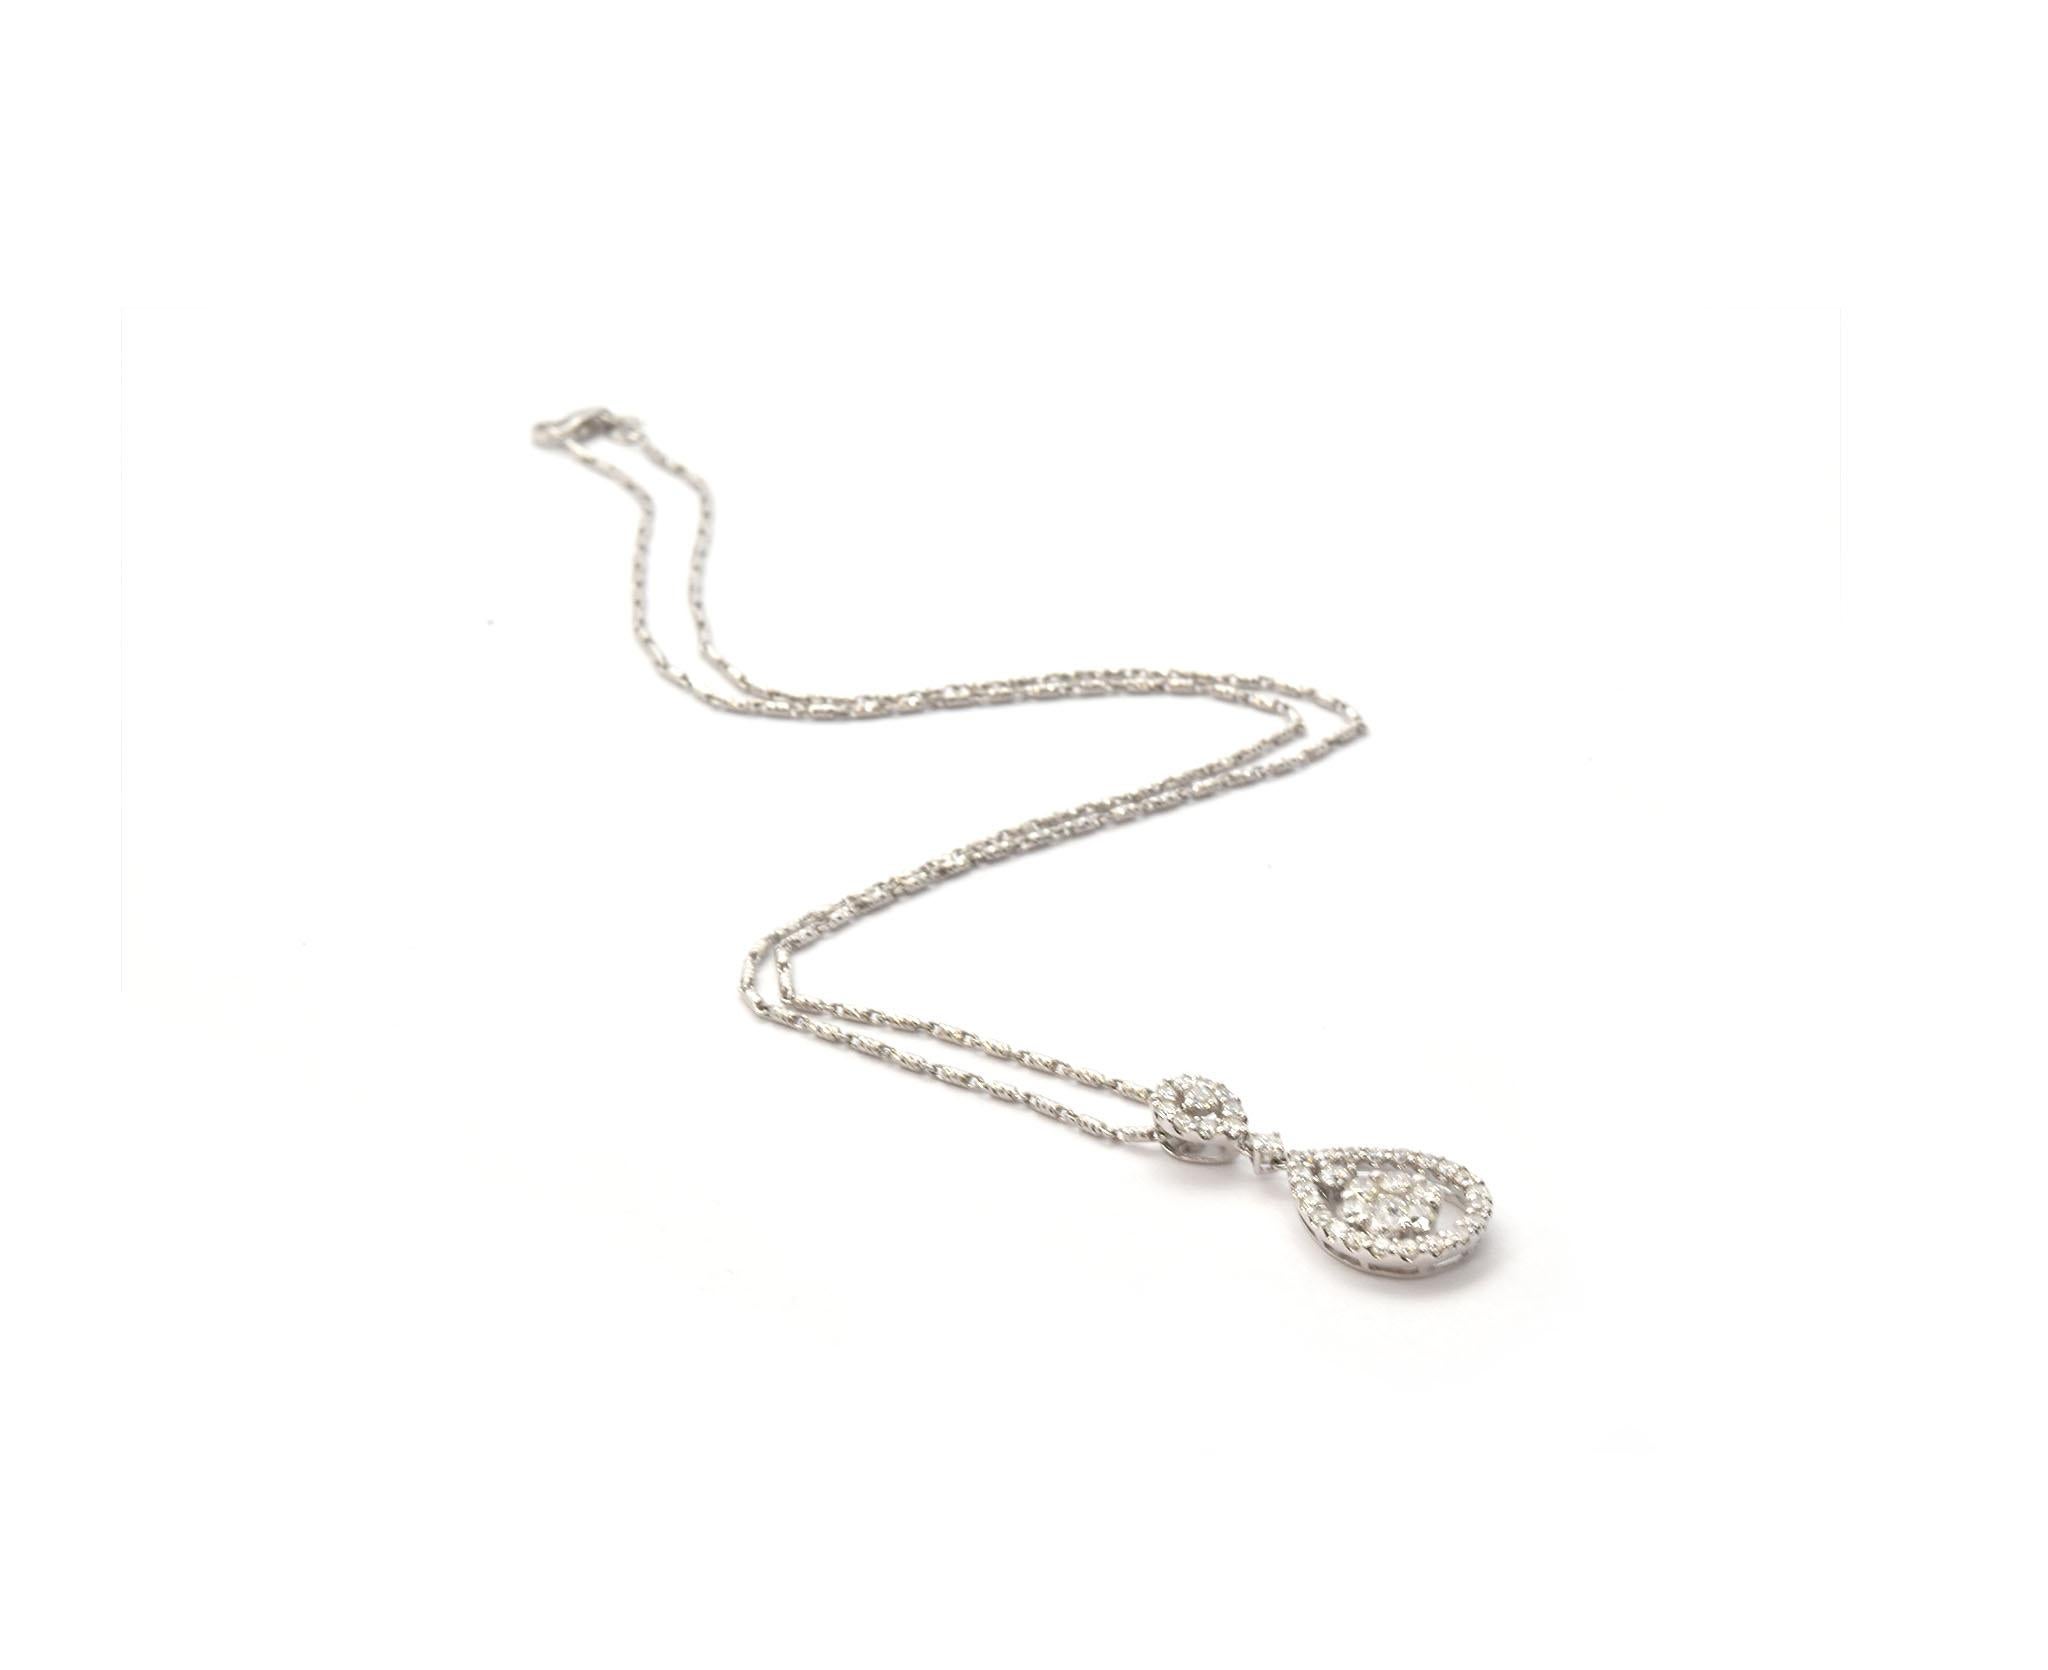 This gorgeous necklace features sparkling round diamonds set into 18k white gold. The diamonds have a total weight of 1.25 carats. The drop pendant measures 28x13mm, and the necklace measures 18” in length. The piece weighs 6.90 grams.